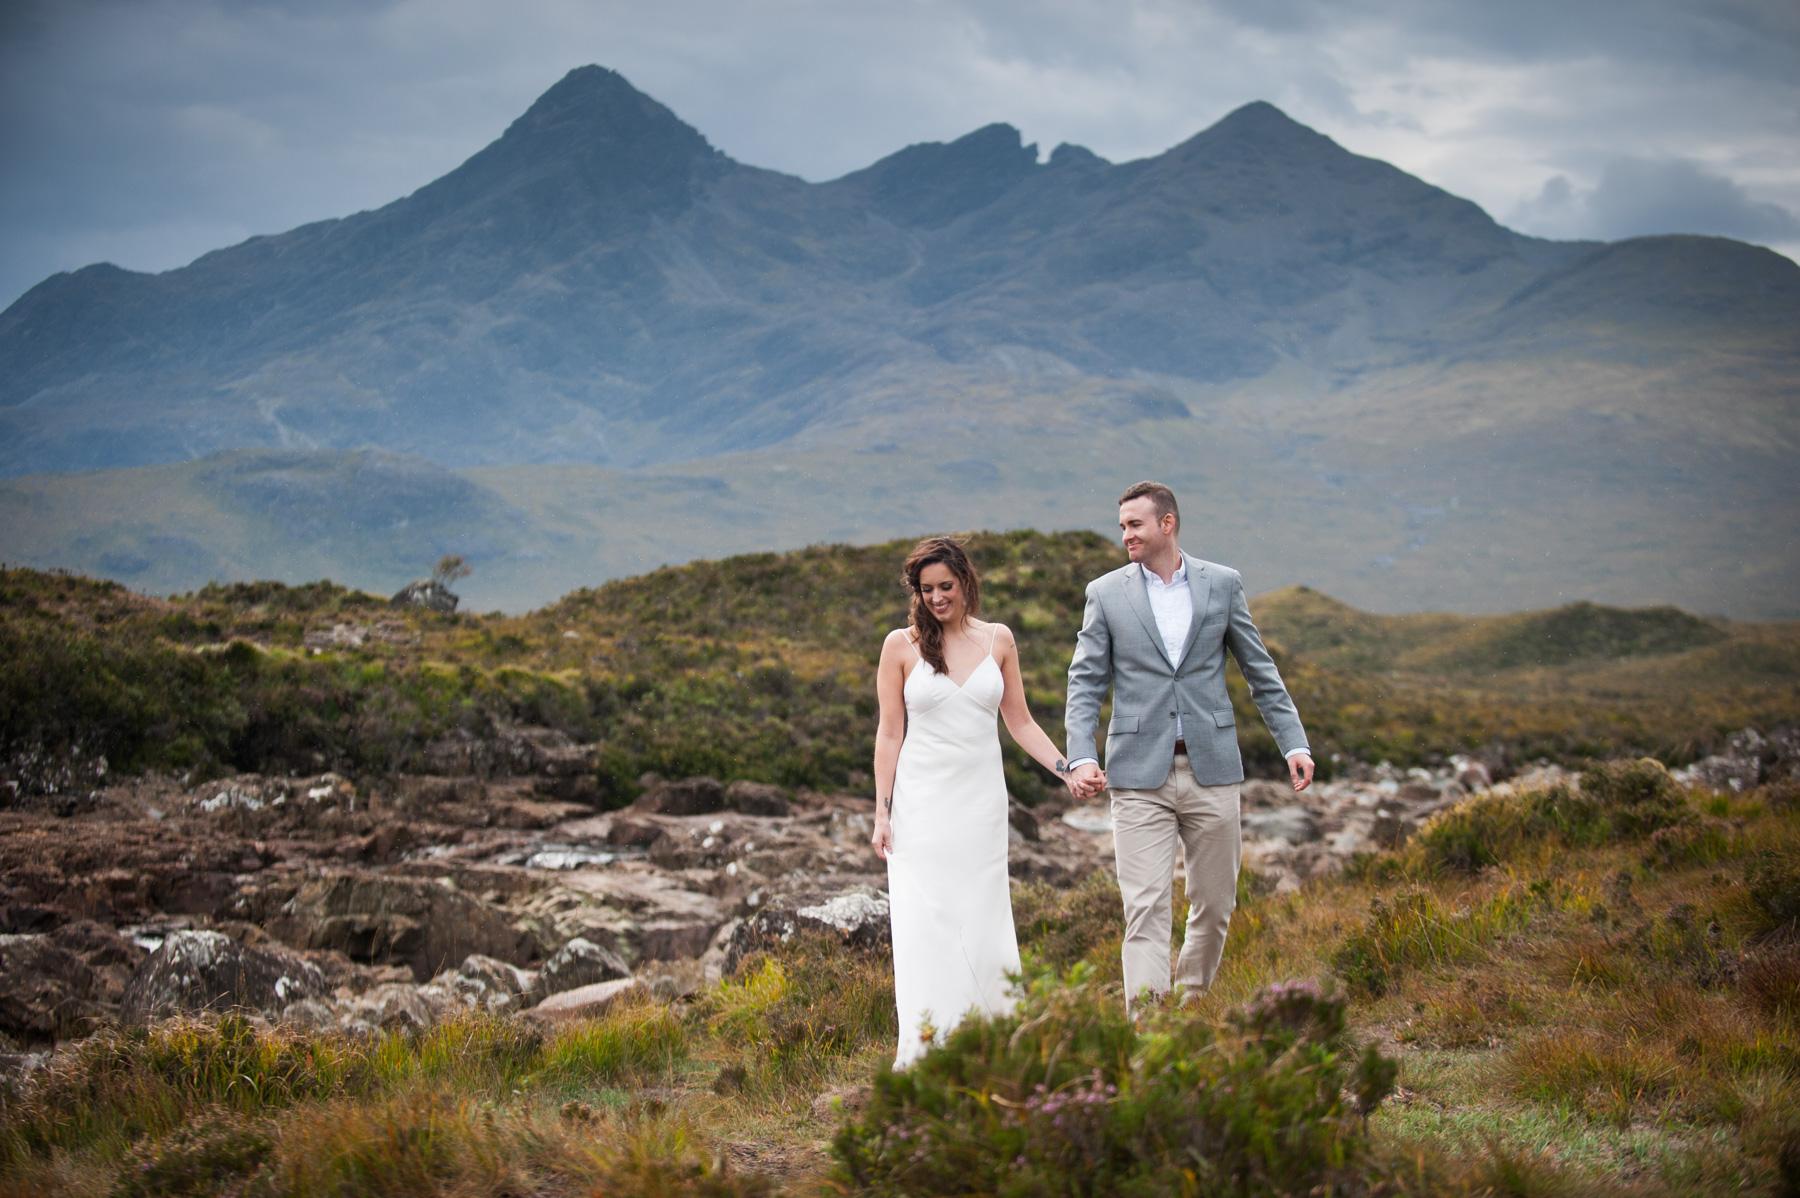 photograph of bride and groom commitment wedding ceremony isle of skye photograph